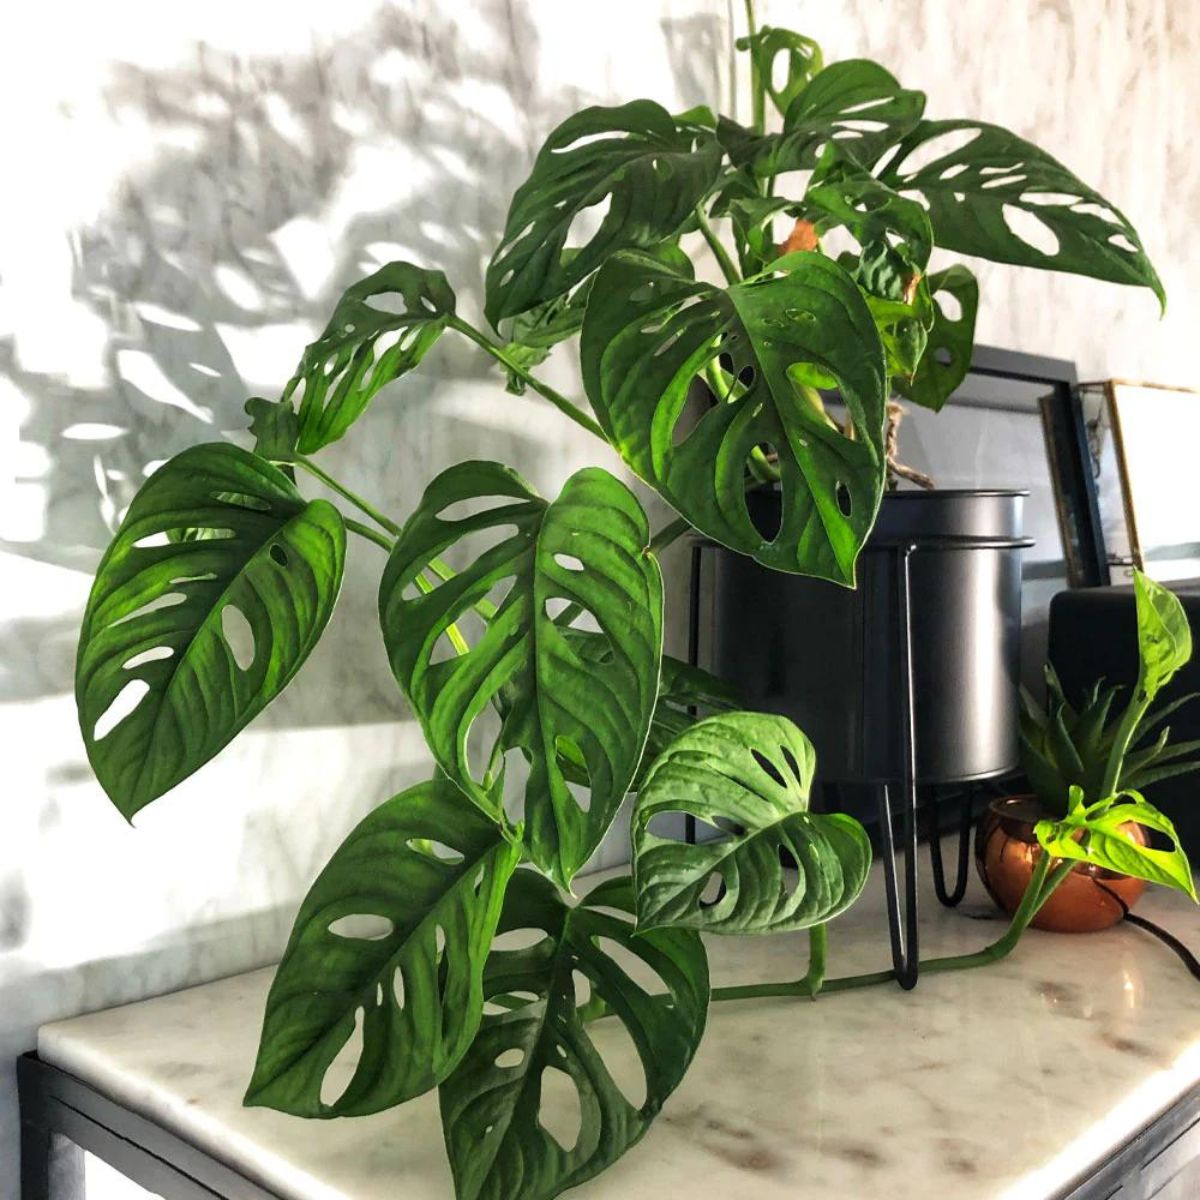 Monstera Adansoni one of the best Mothers day plants to give embed